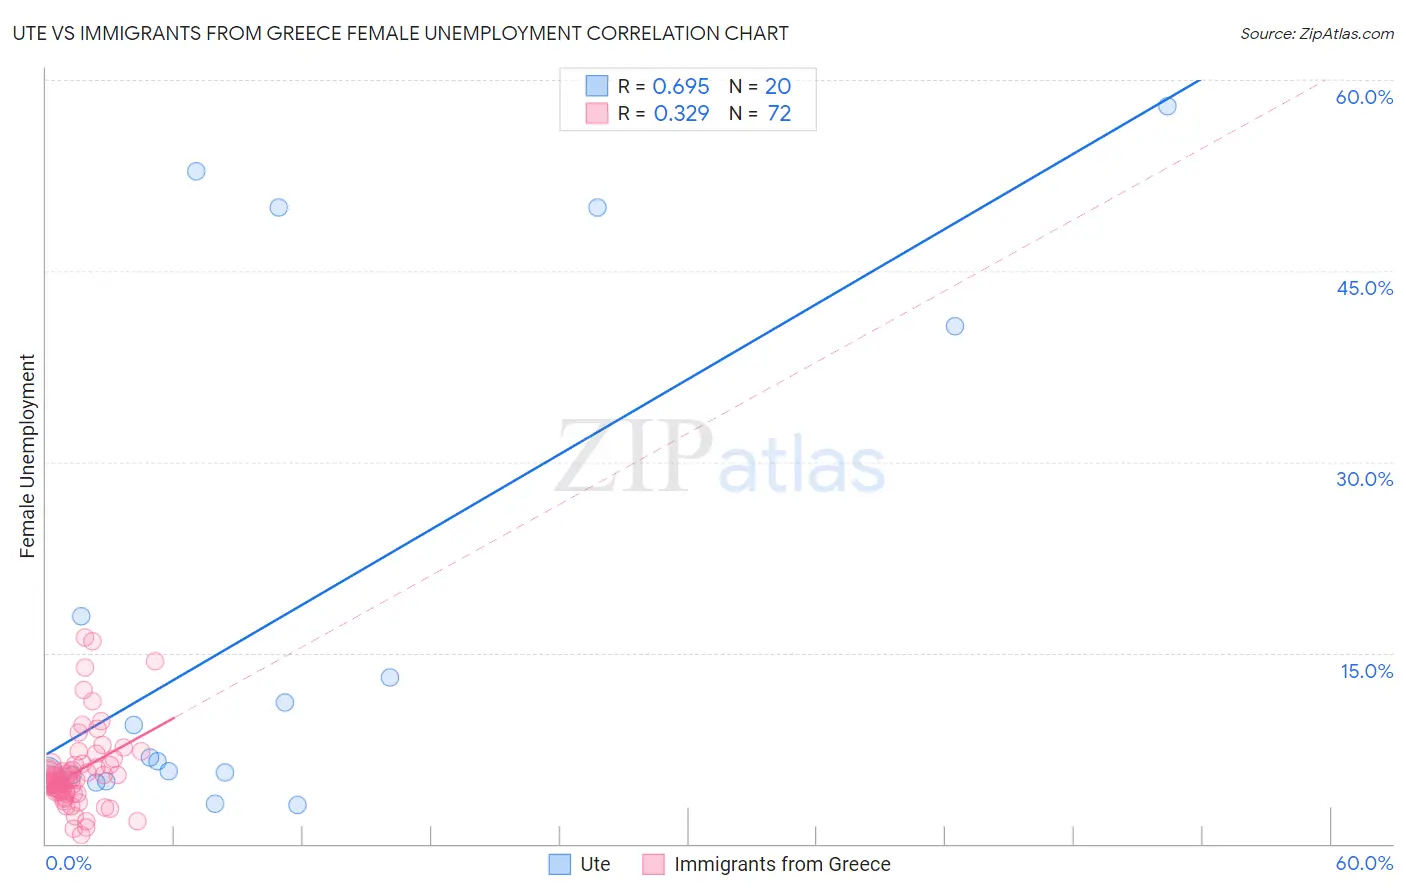 Ute vs Immigrants from Greece Female Unemployment